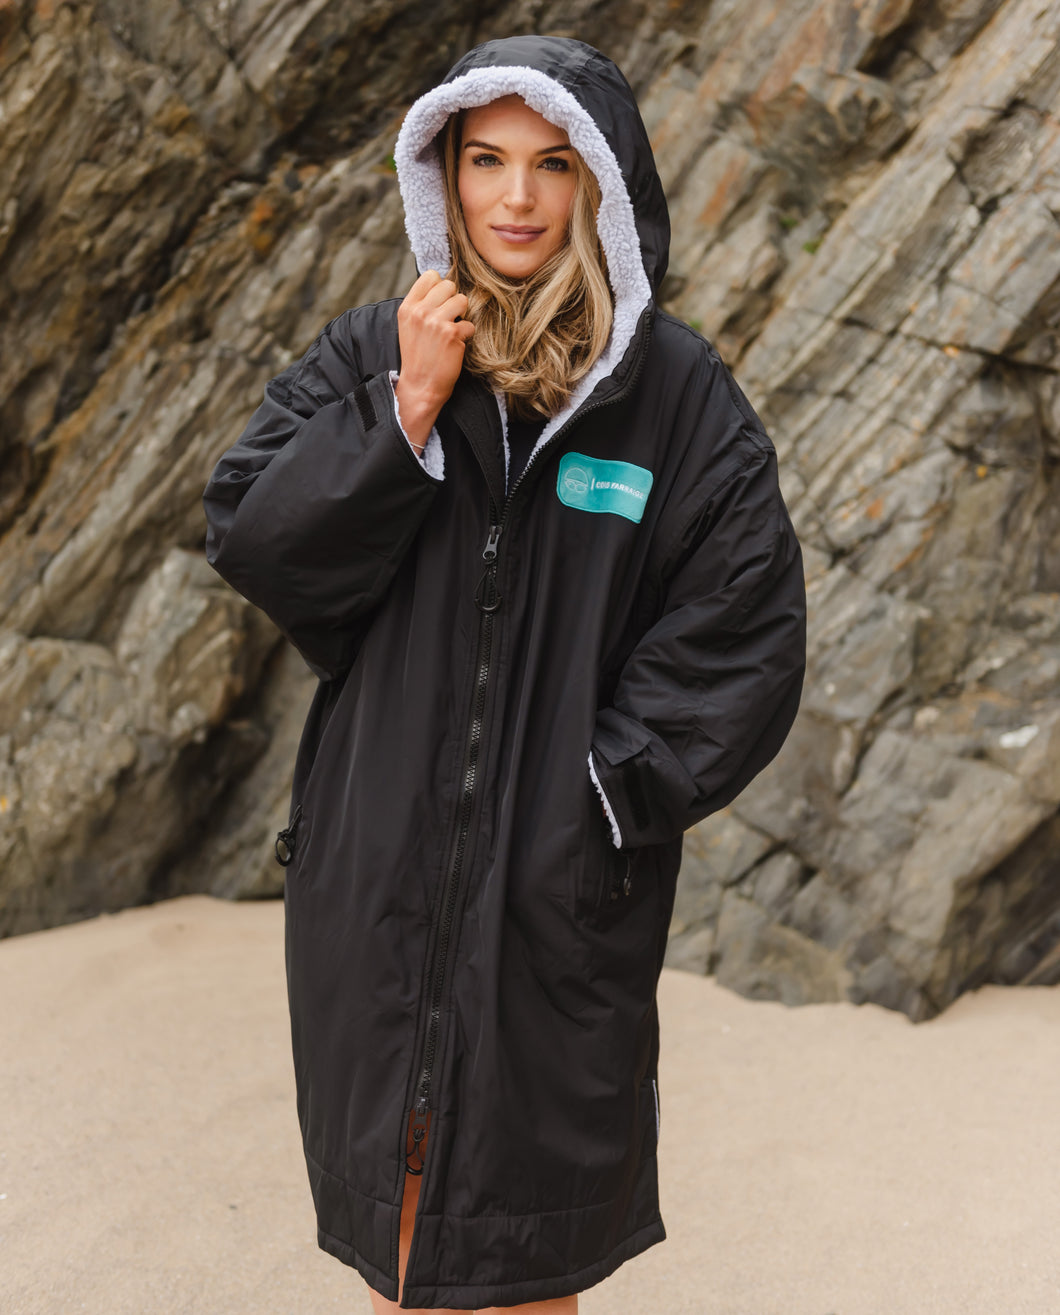 Cois Farraige Waterproof Changing Robe. (Black)Eco Friendly